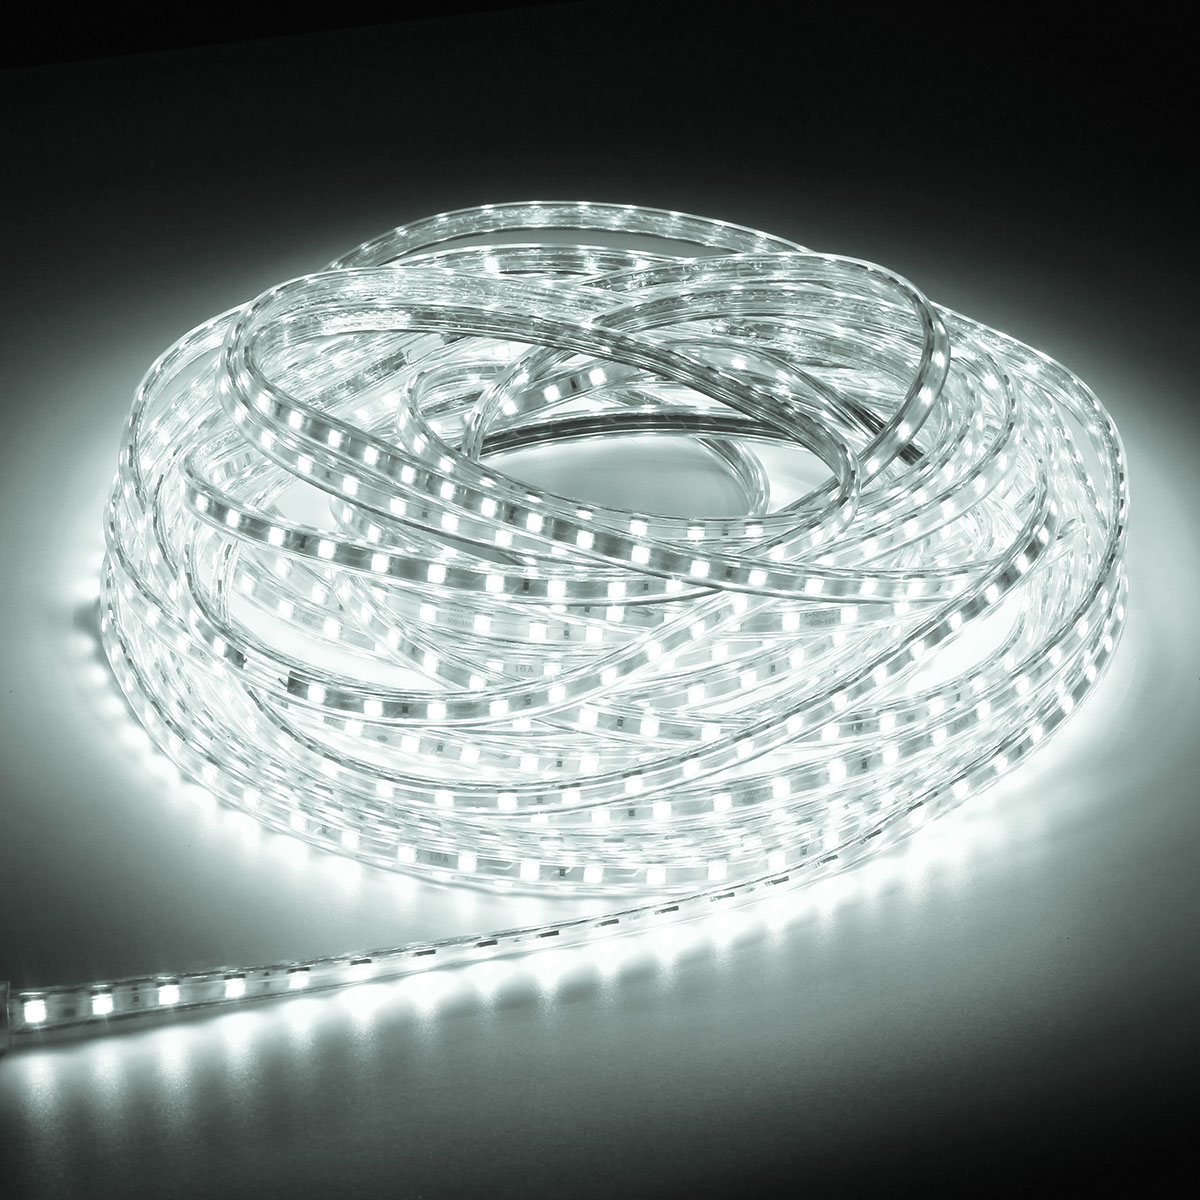 20M-5050-LED-SMD-Outdoor-Waterproof-Flexible-Tape-Rope-Strip-Light-Xmas-220V-1080114-7